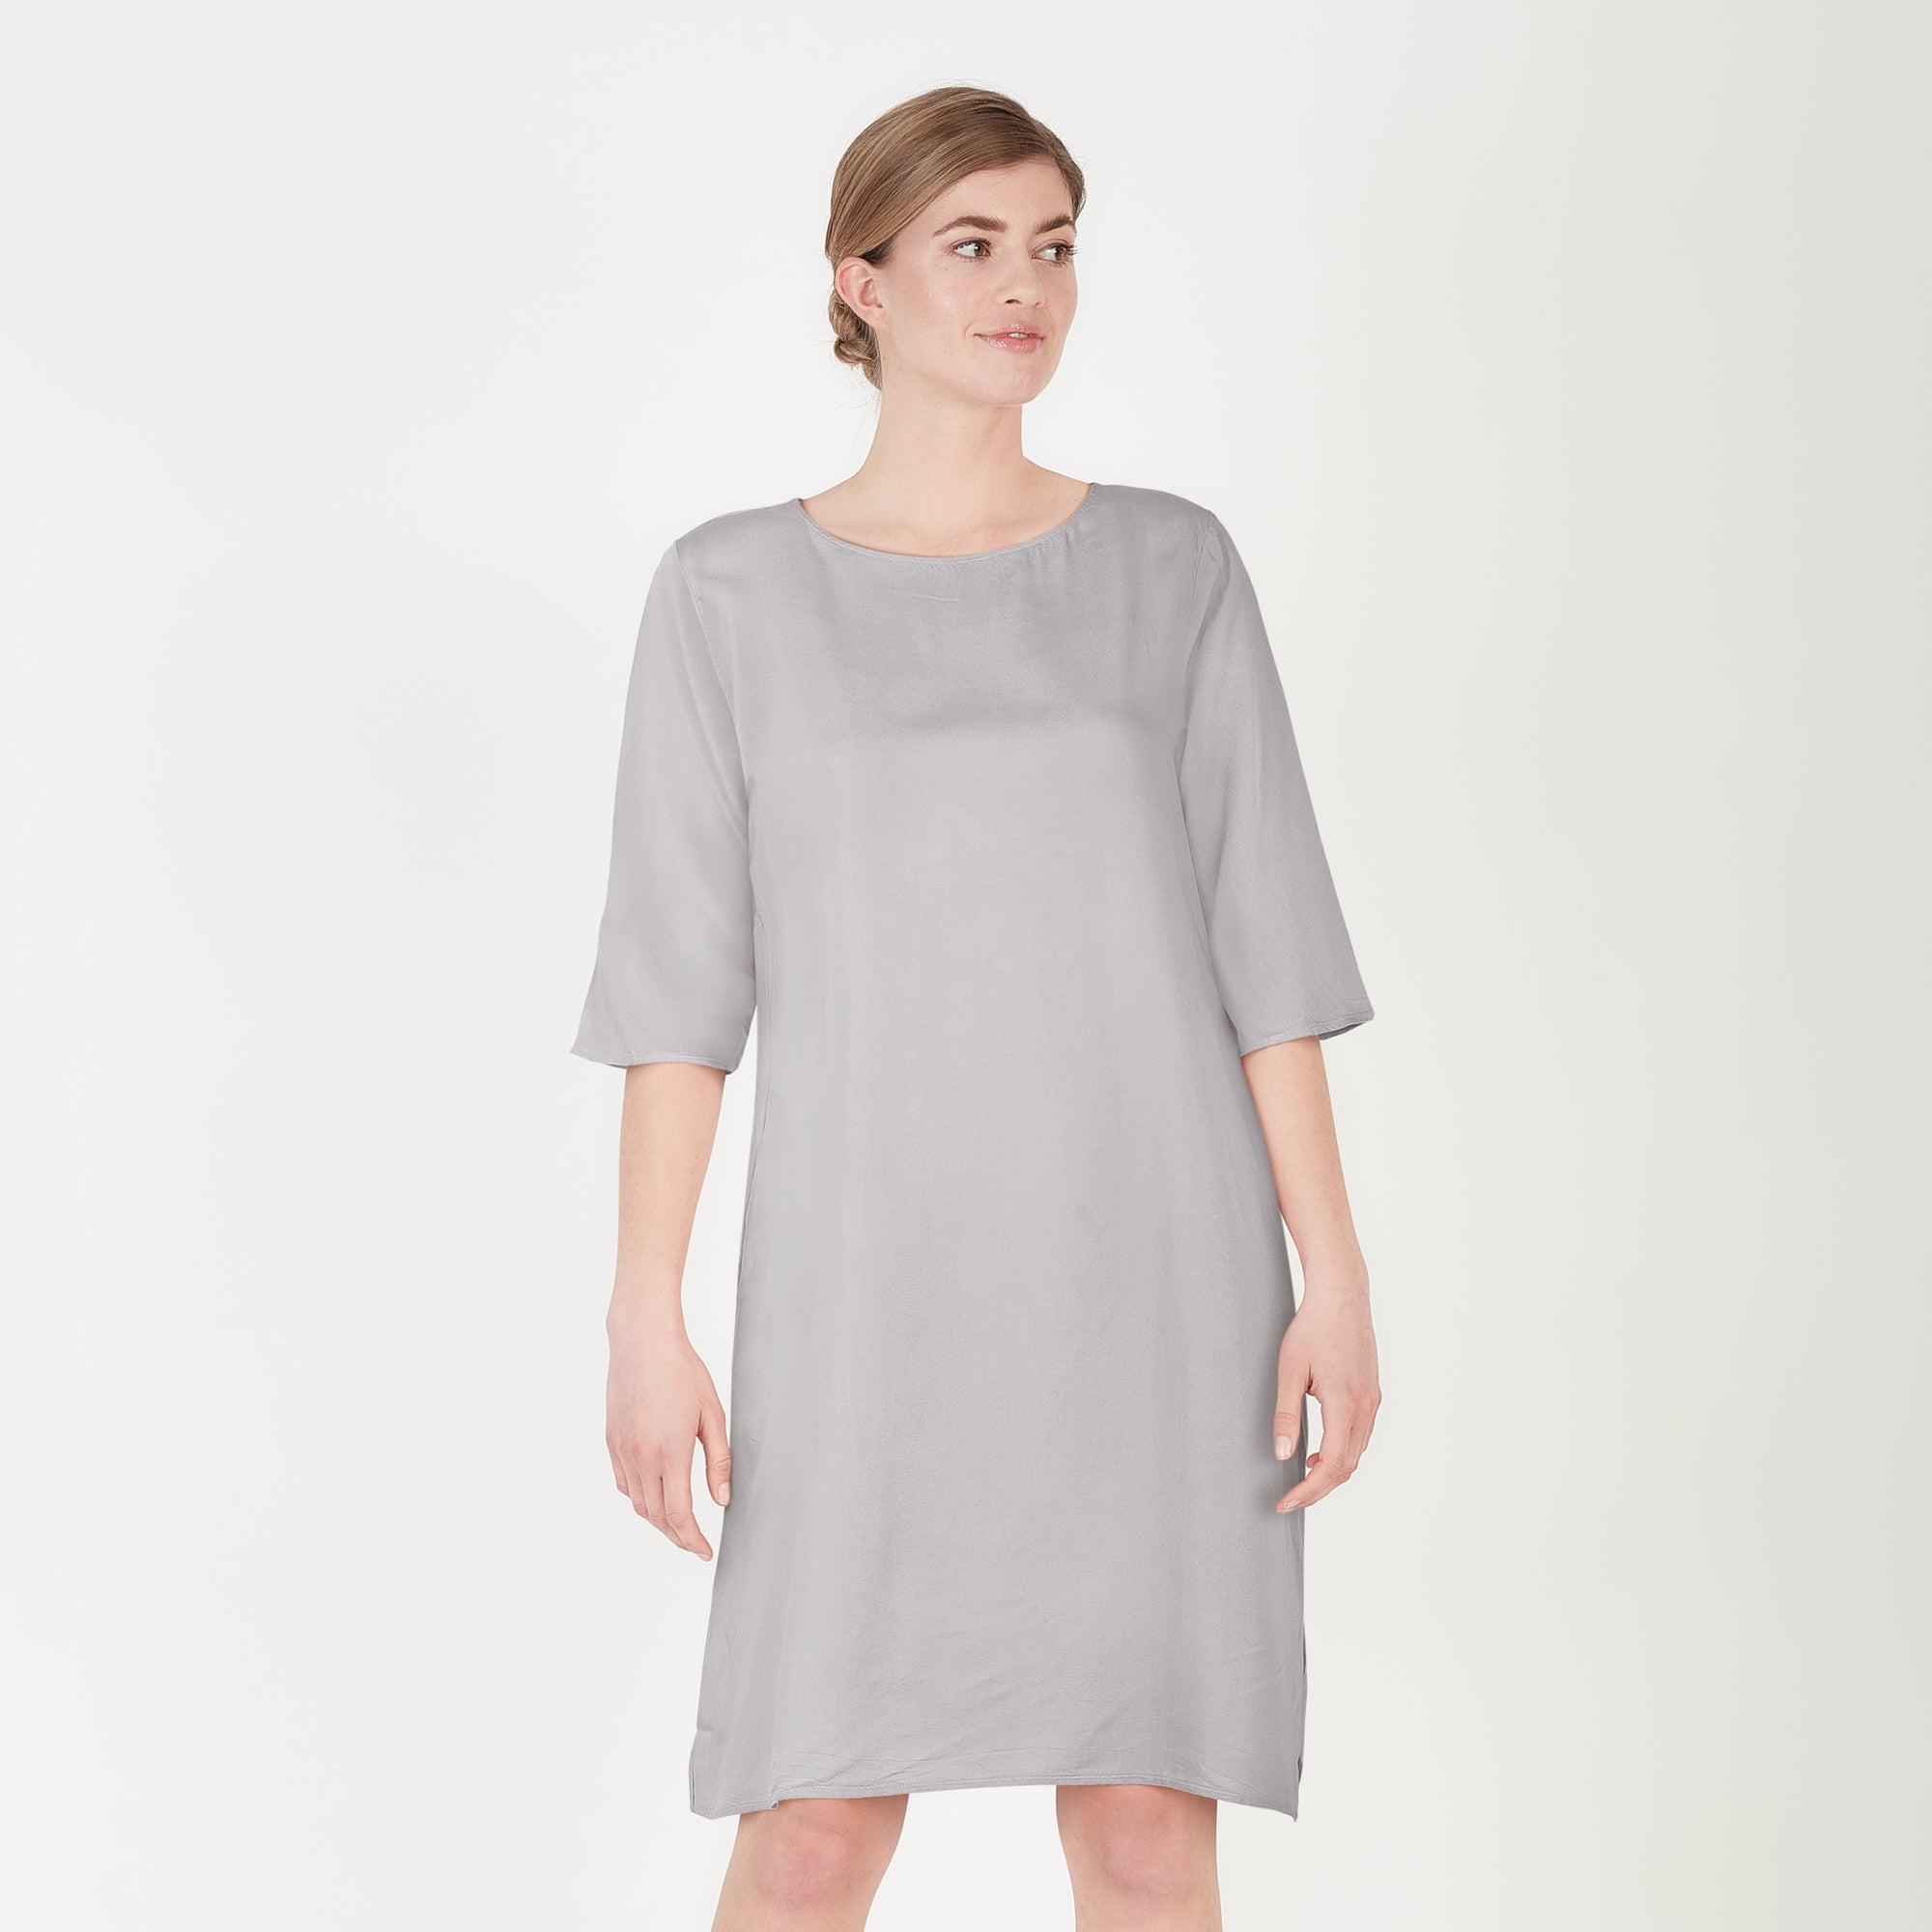 Saltpetre womens wear, indo-western knee length dress for semi formal, casual, occassional wear.
 Comfortably elegant dress in grey colour with three quarter sleeves, side slits and side pockets.